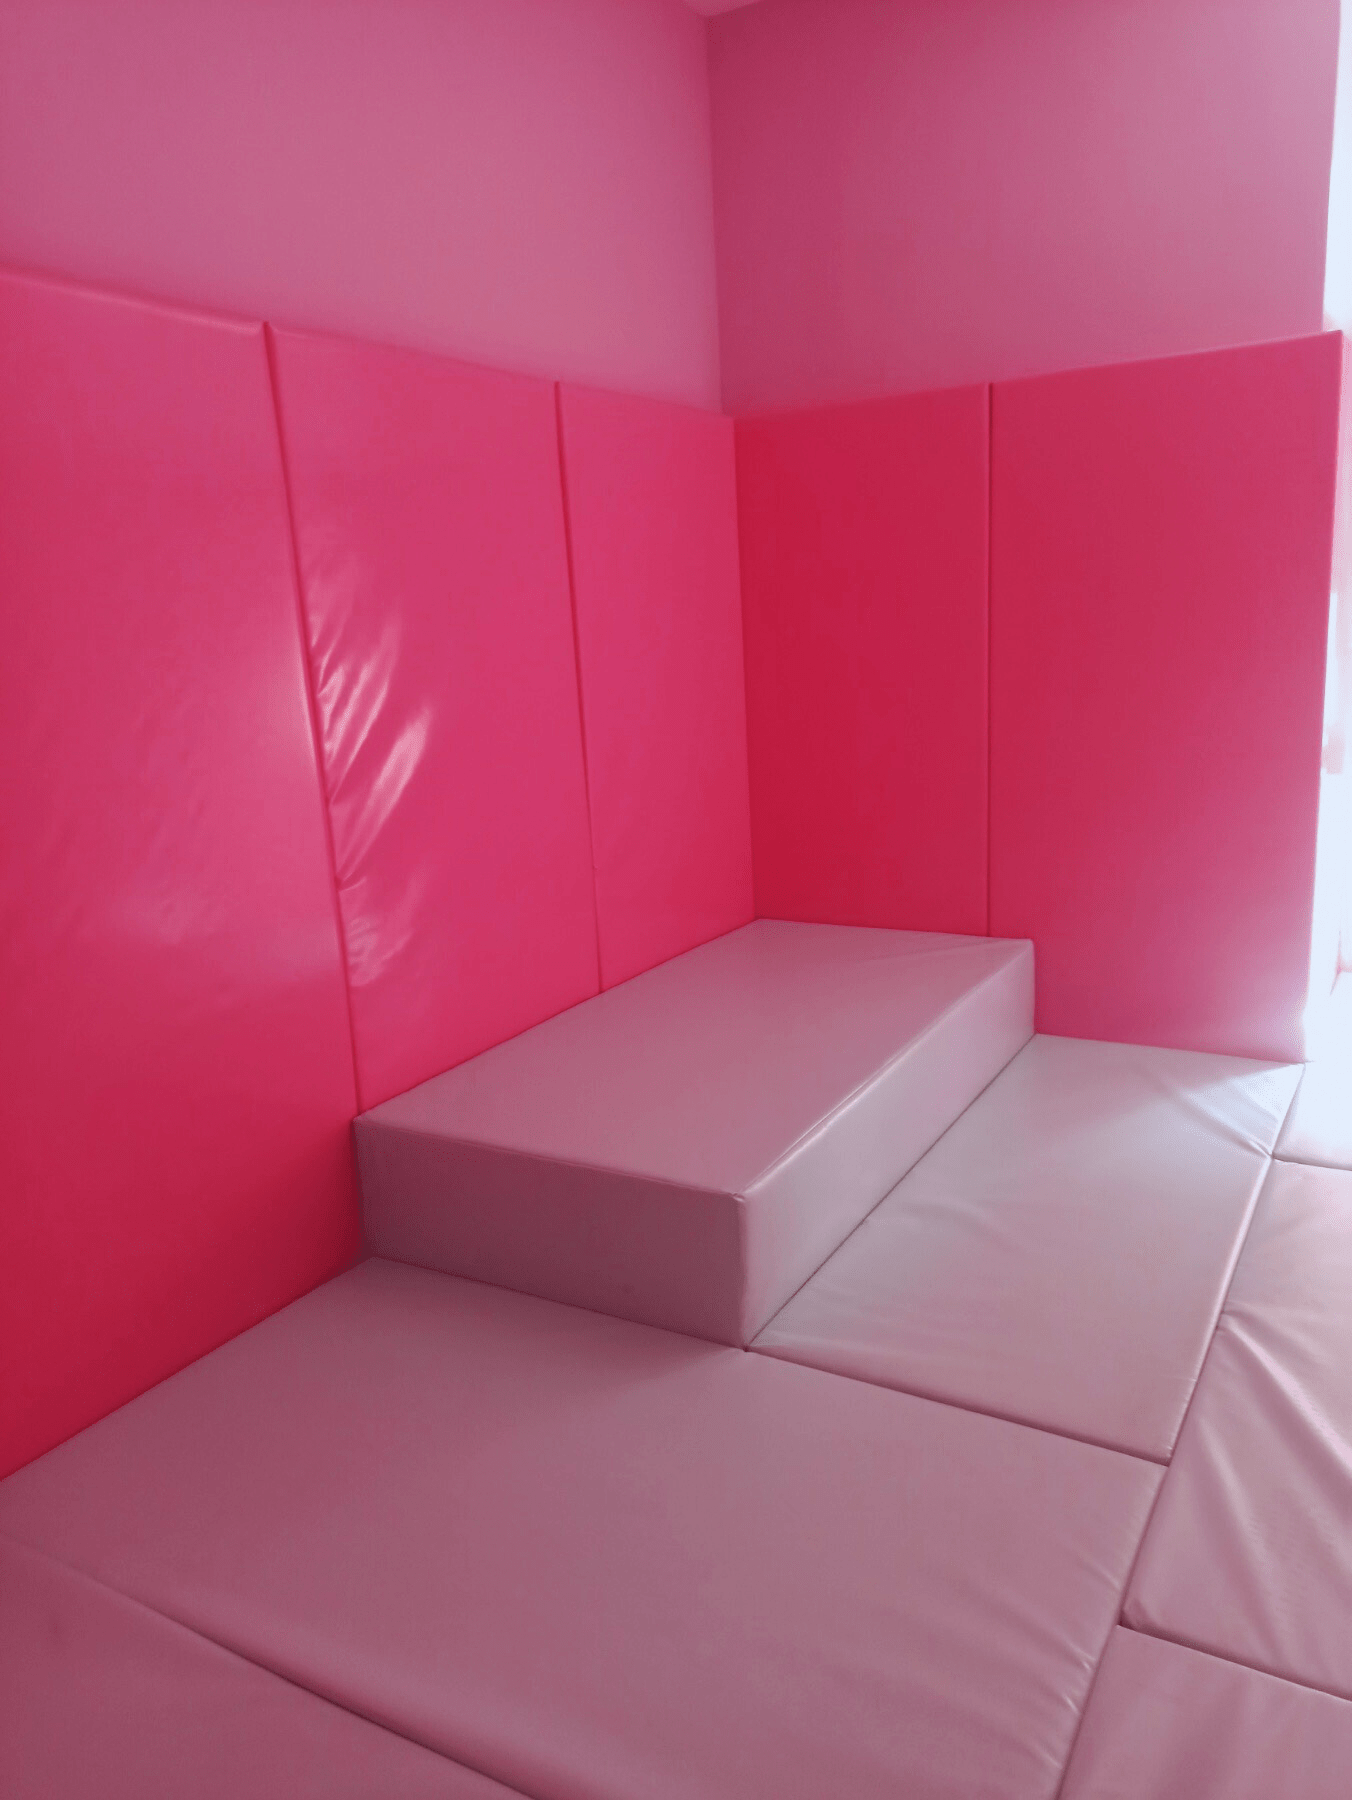 Floor & Wall Padding for creation of "Soft Room"